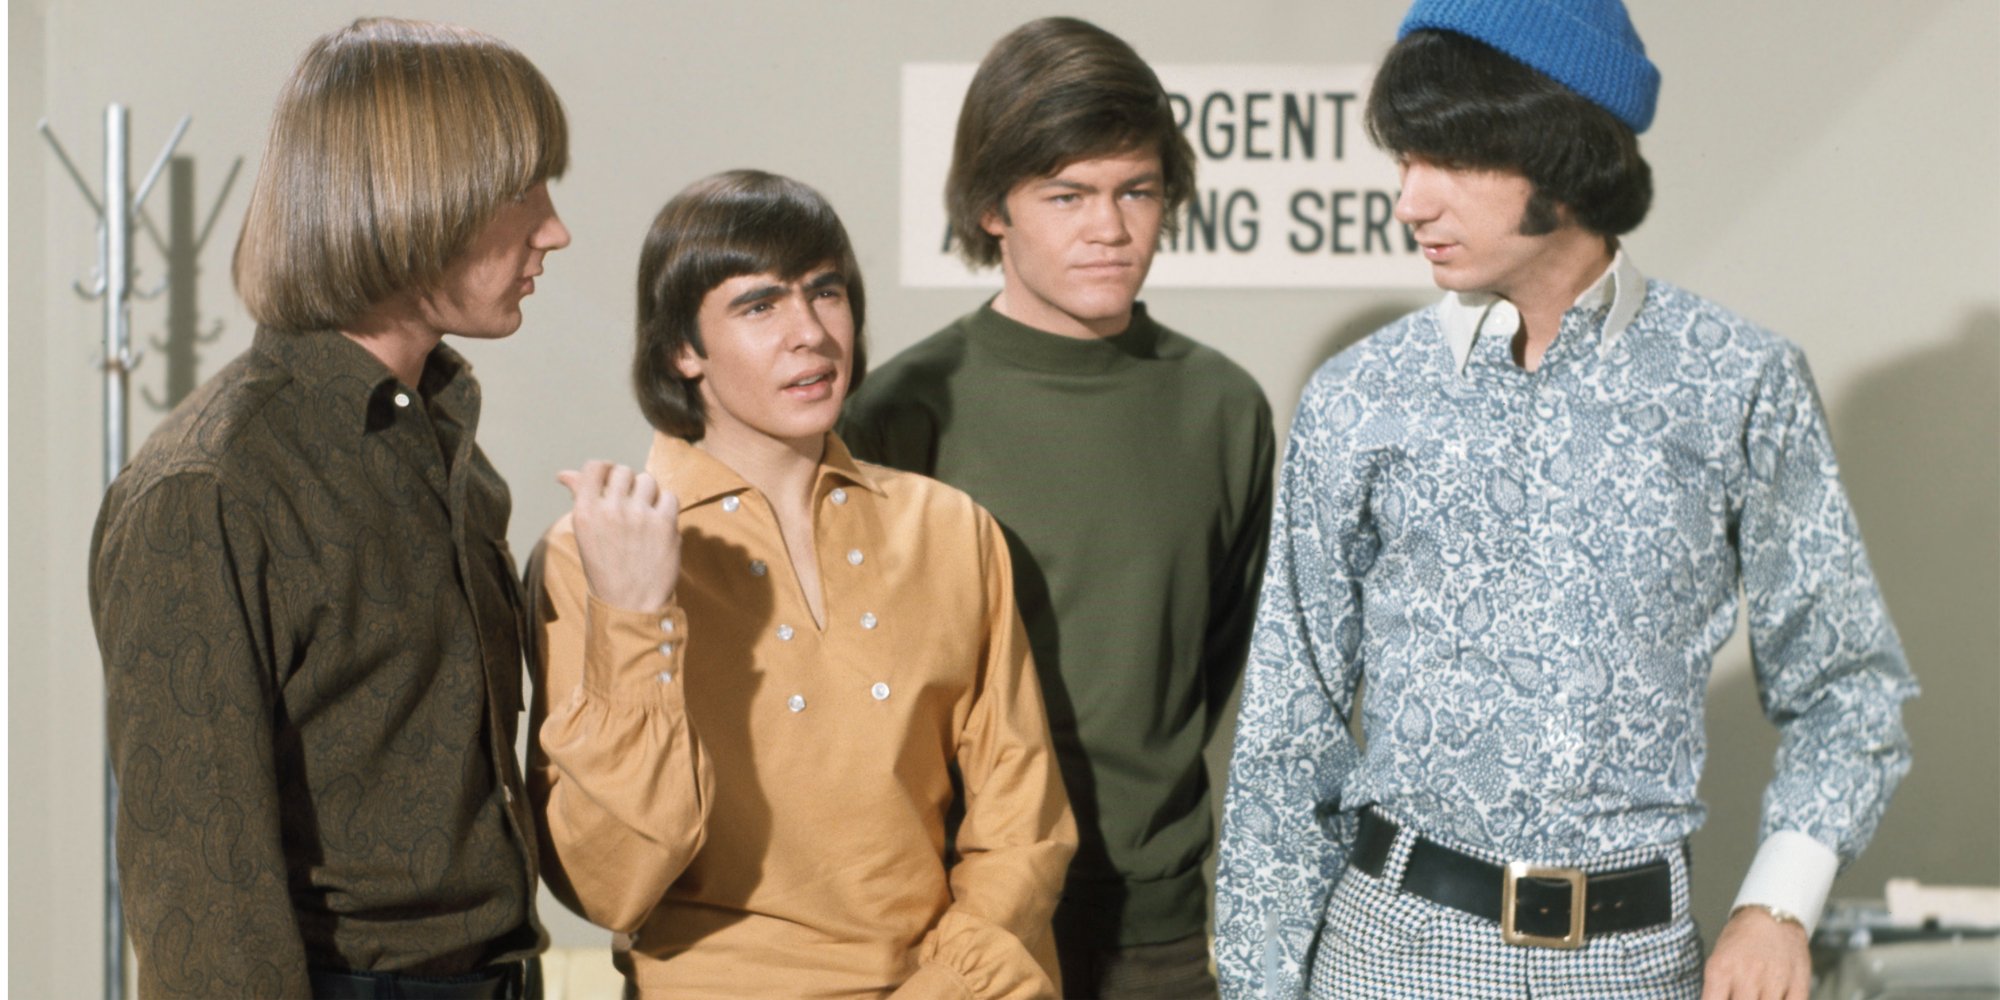 The title of 'The Monkees' television show was intentionally misspelled by show producers.